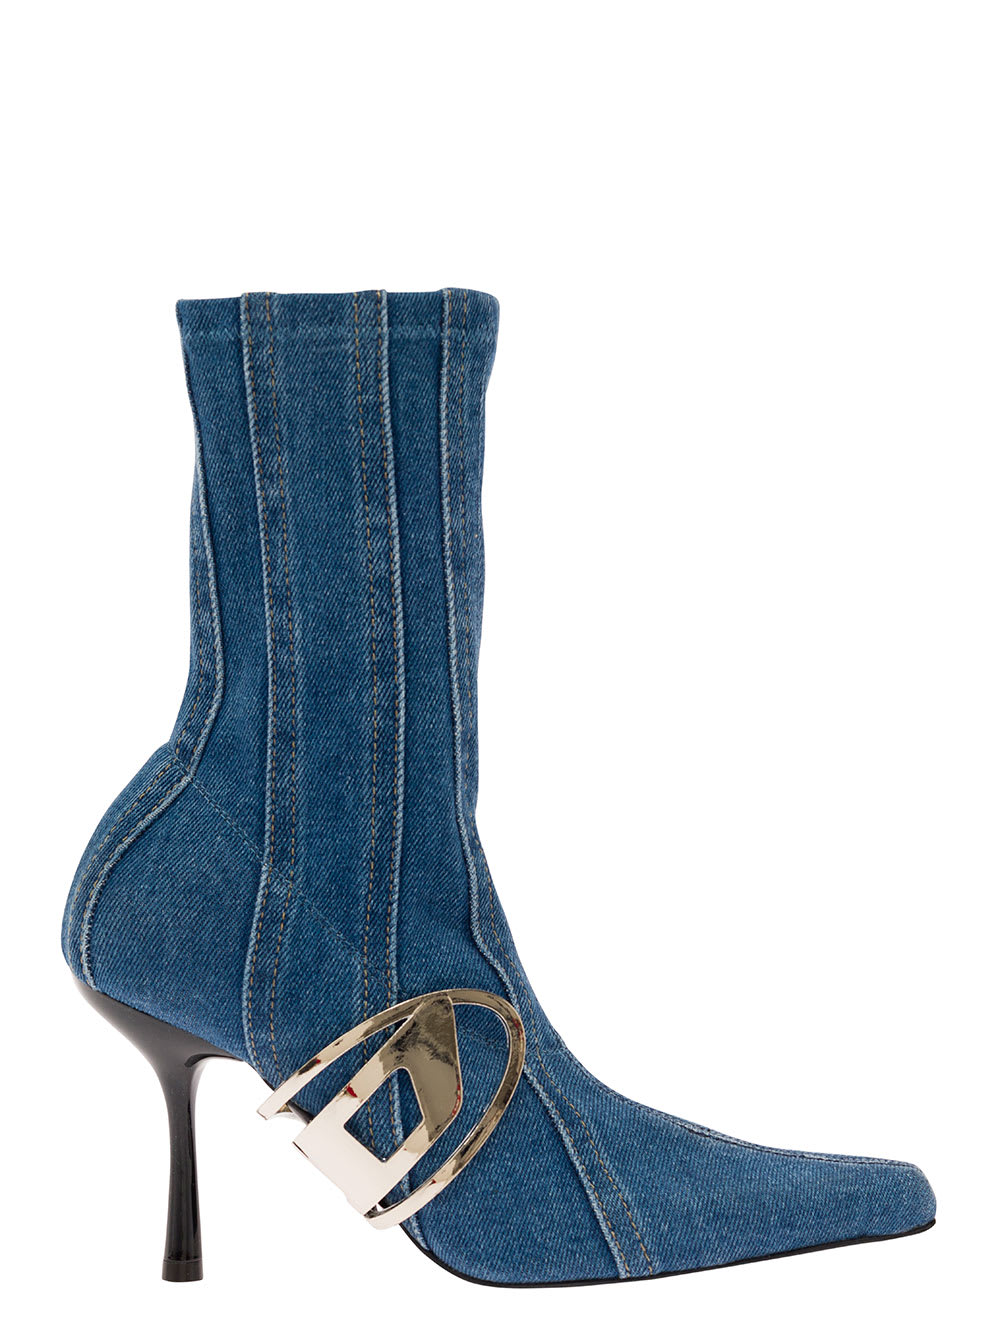 DIESEL D-ECLIPSE LIGHT BLUE SOCKS BOOTS WITH MACRO OVAL D LOGO IN STRETCH COTTON DENIM WOMAN